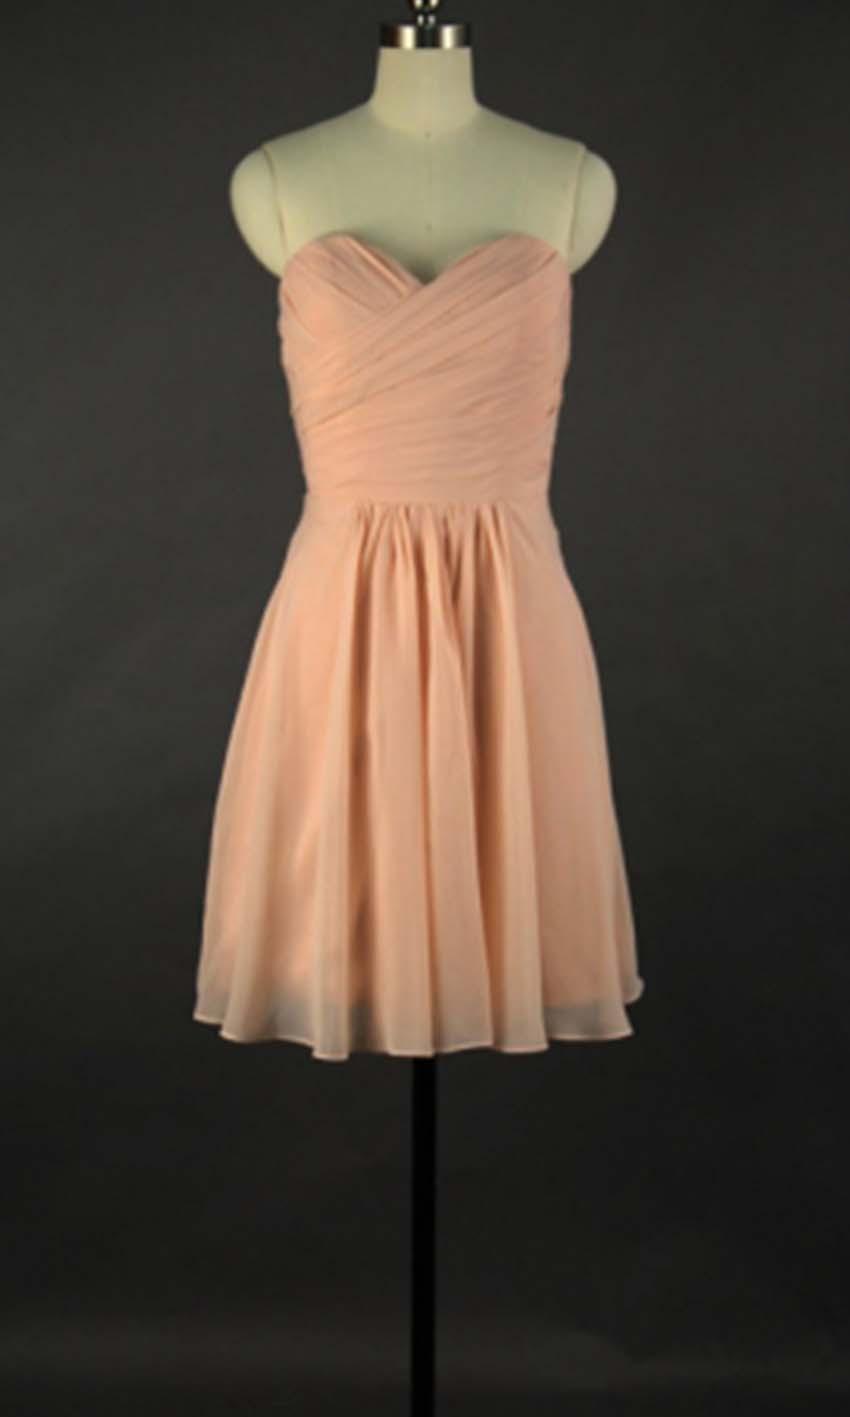 Mariage - Cute Peach Short Sweetheart Bridesmaid Dresses KSP314 [KSP314] - £79.00 : Cheap Prom Dresses Uk, Bridesmaid Dresses, 2014 Prom & Evening Dresses, Look for cheap elegant prom dresses 2014, cocktail gowns, or dresses for special occasions? kissprom.co.uk of